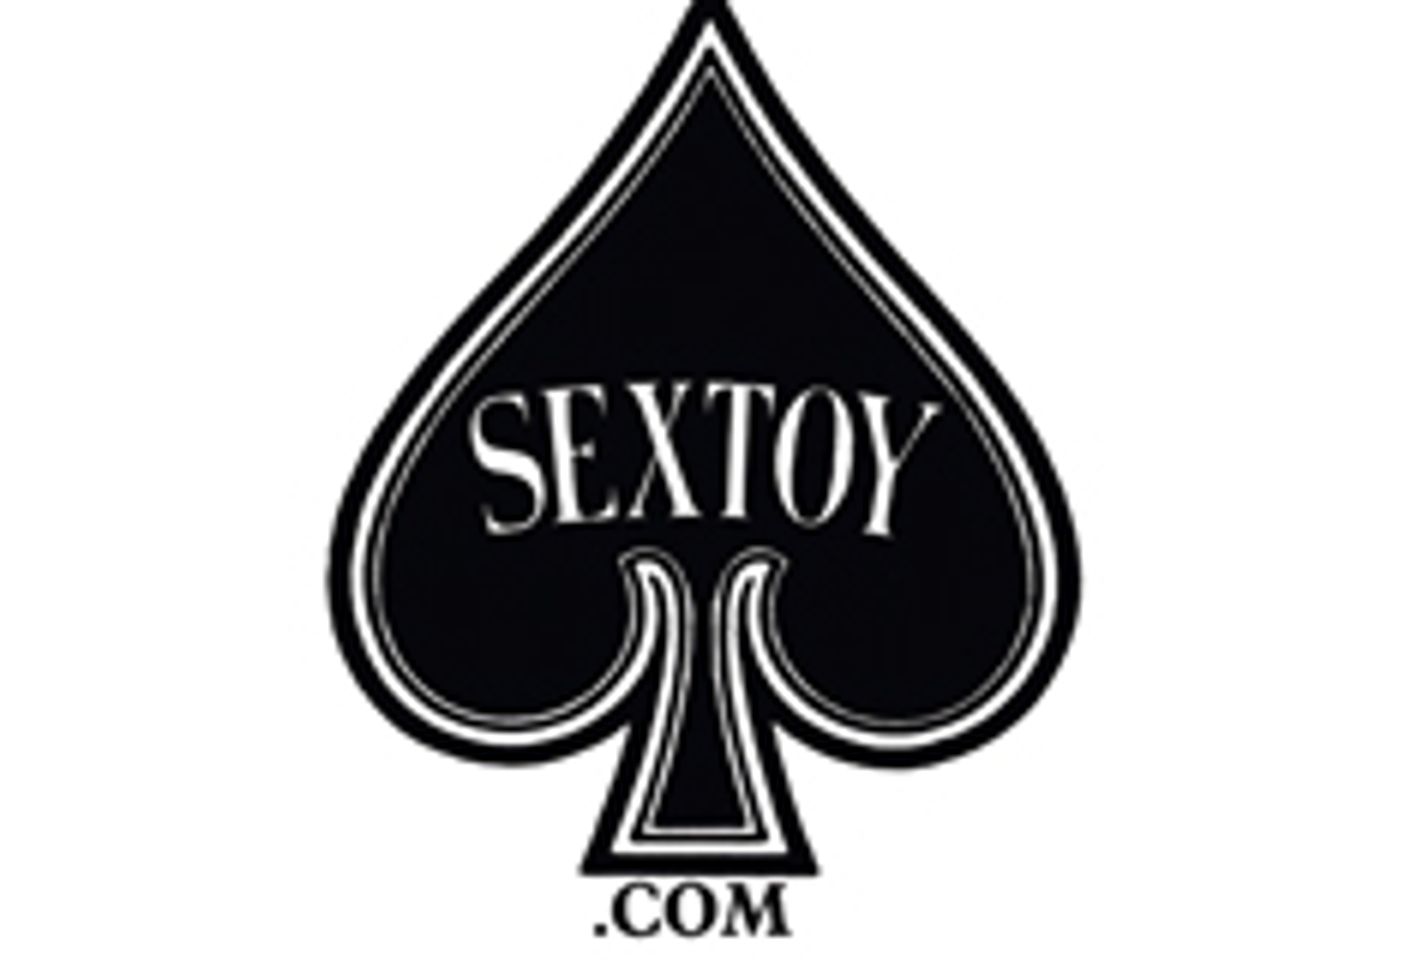 Next Sex Toy Trivia Contest Slated for Aug. 16